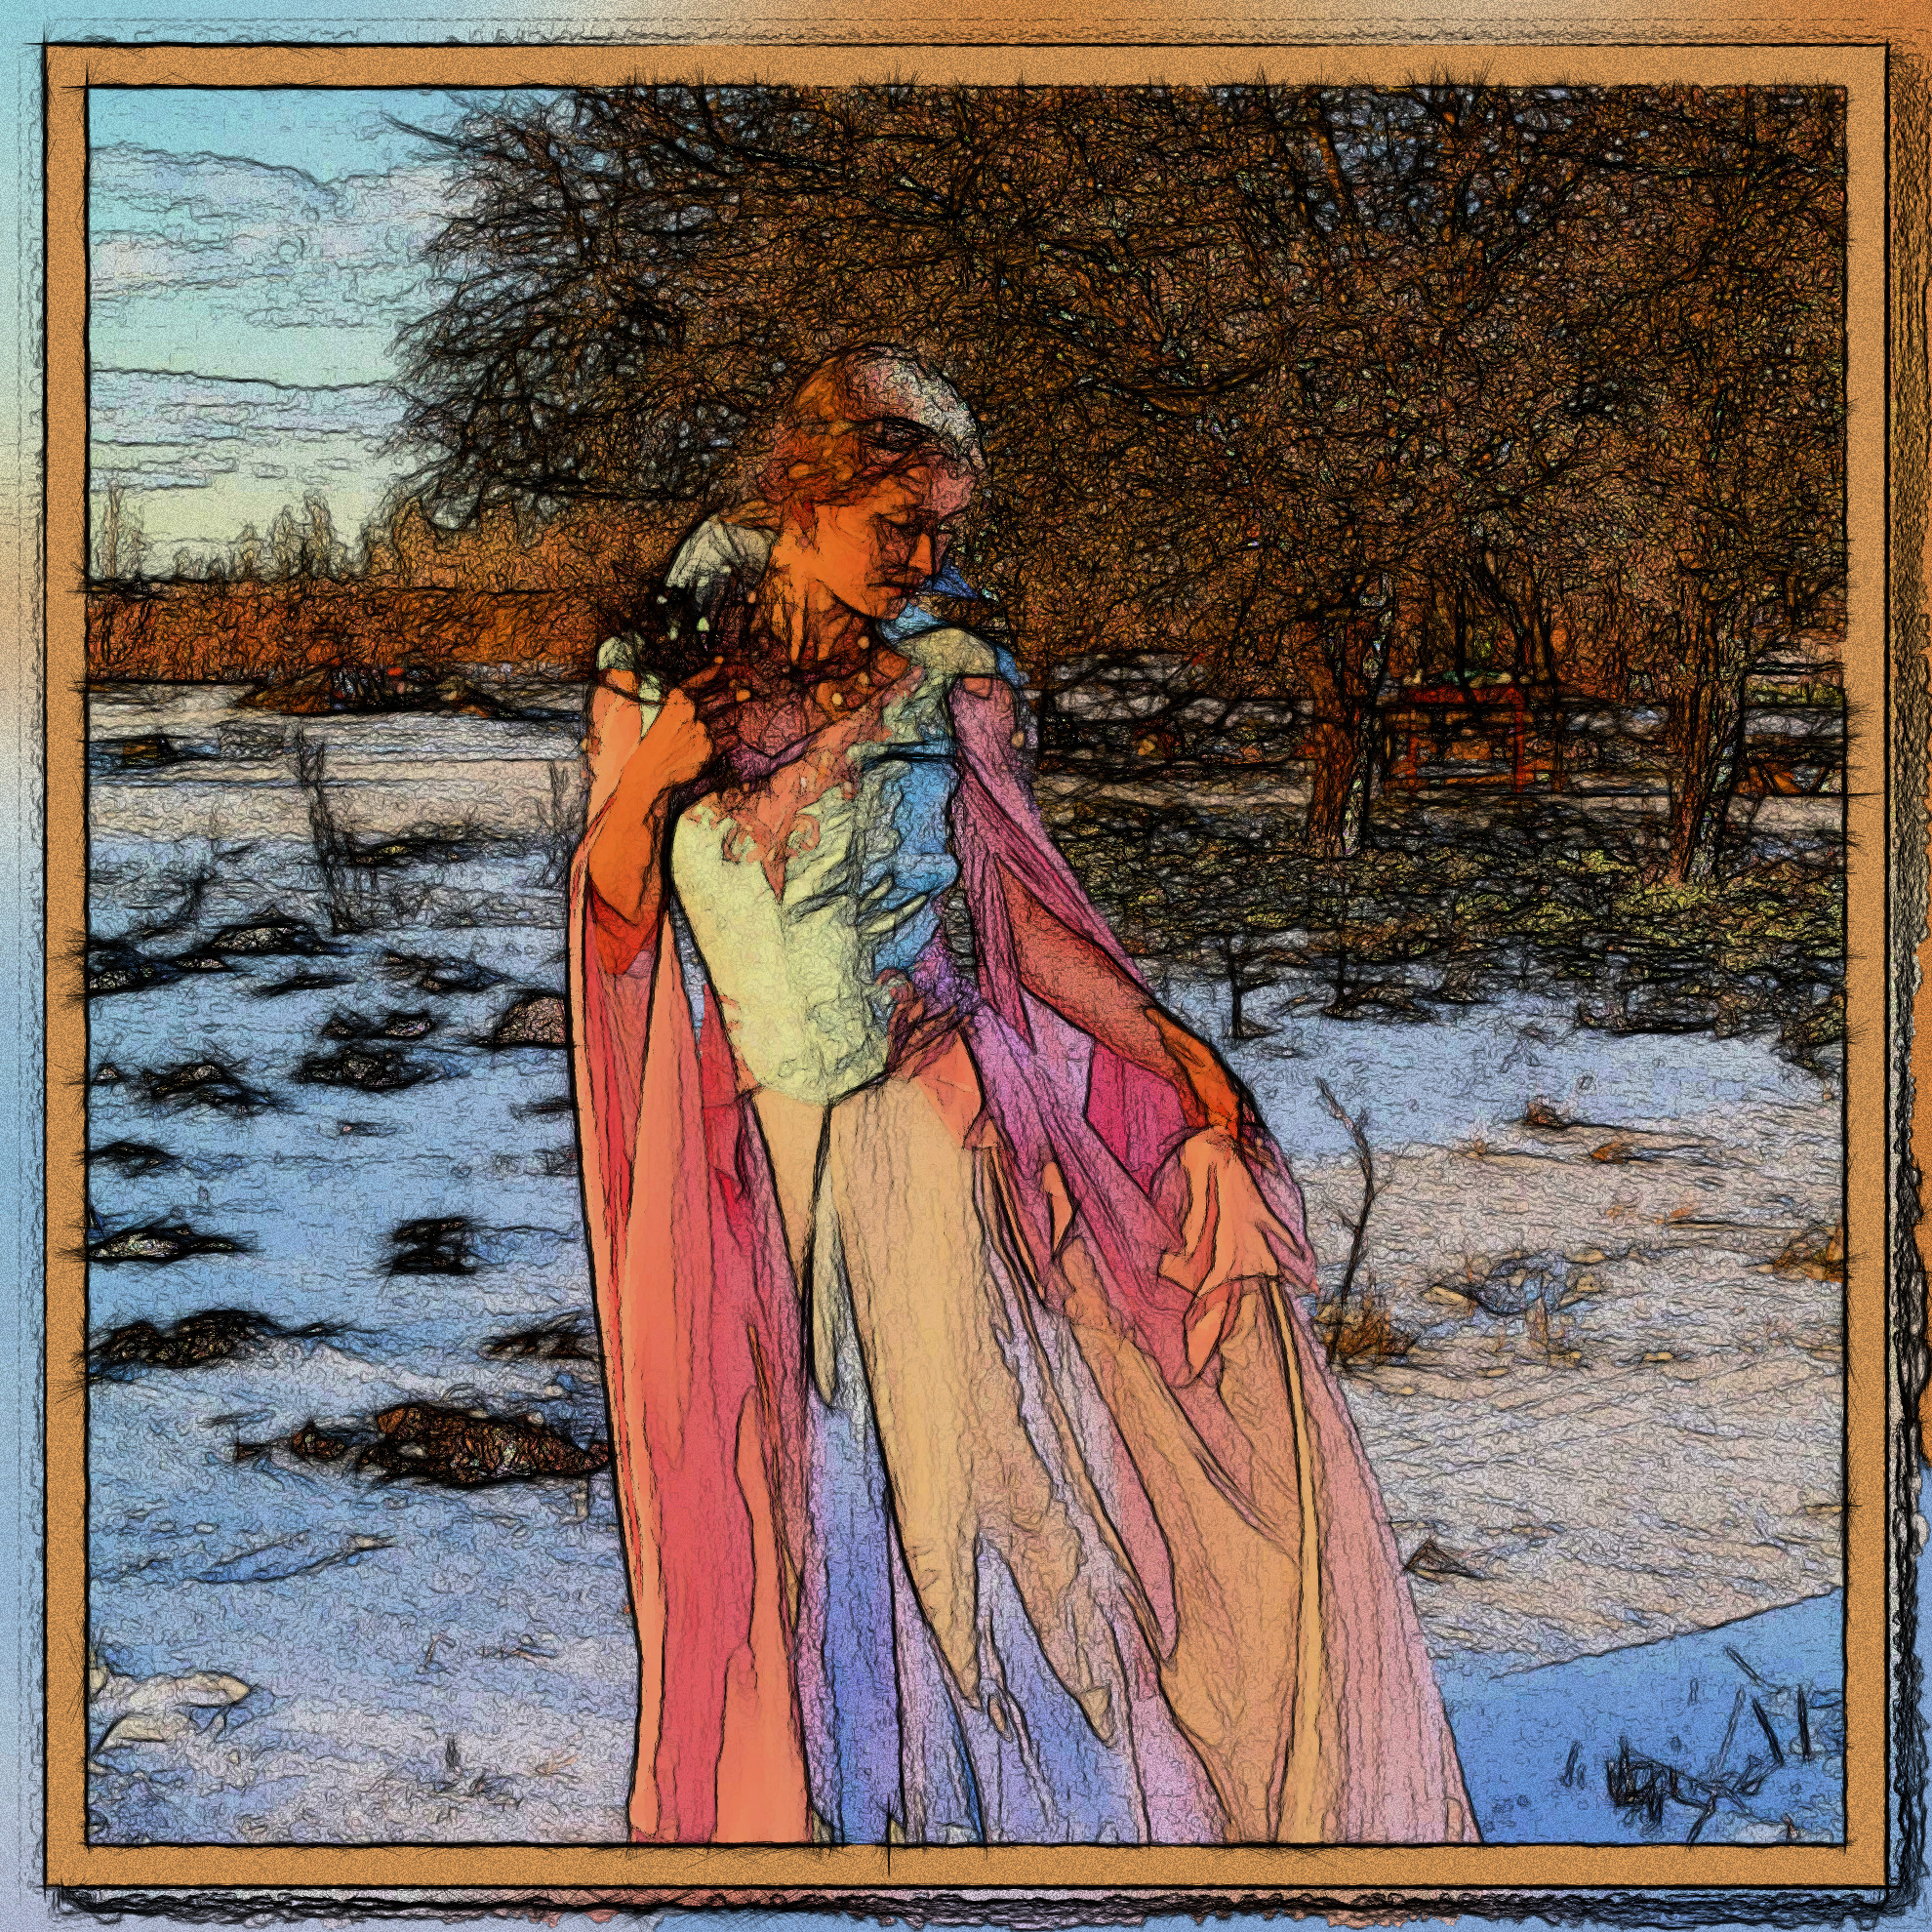 2023-05-28 08-56-06costume__winter_morning__by_aquilina108_dbl2a8k-fullview_portrait with a framed Artistic effect, style HardSketch.jpg